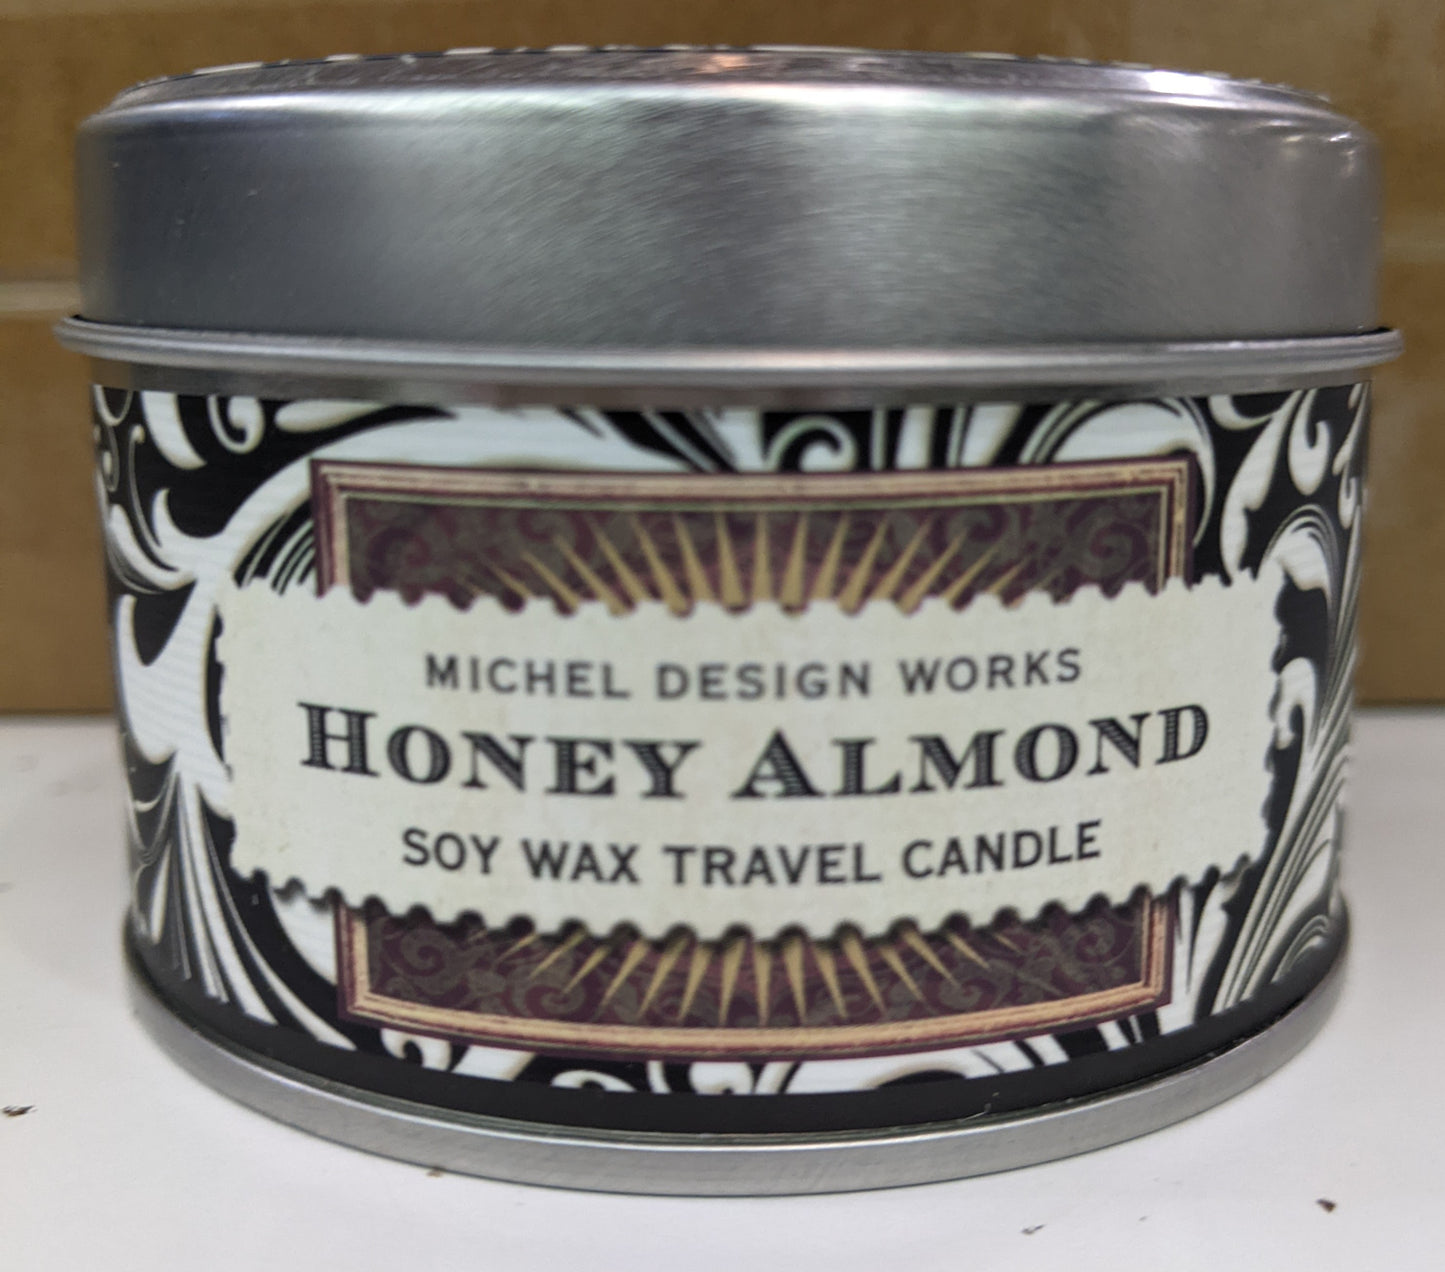 Honey Almond Soy Wax Travel Candle